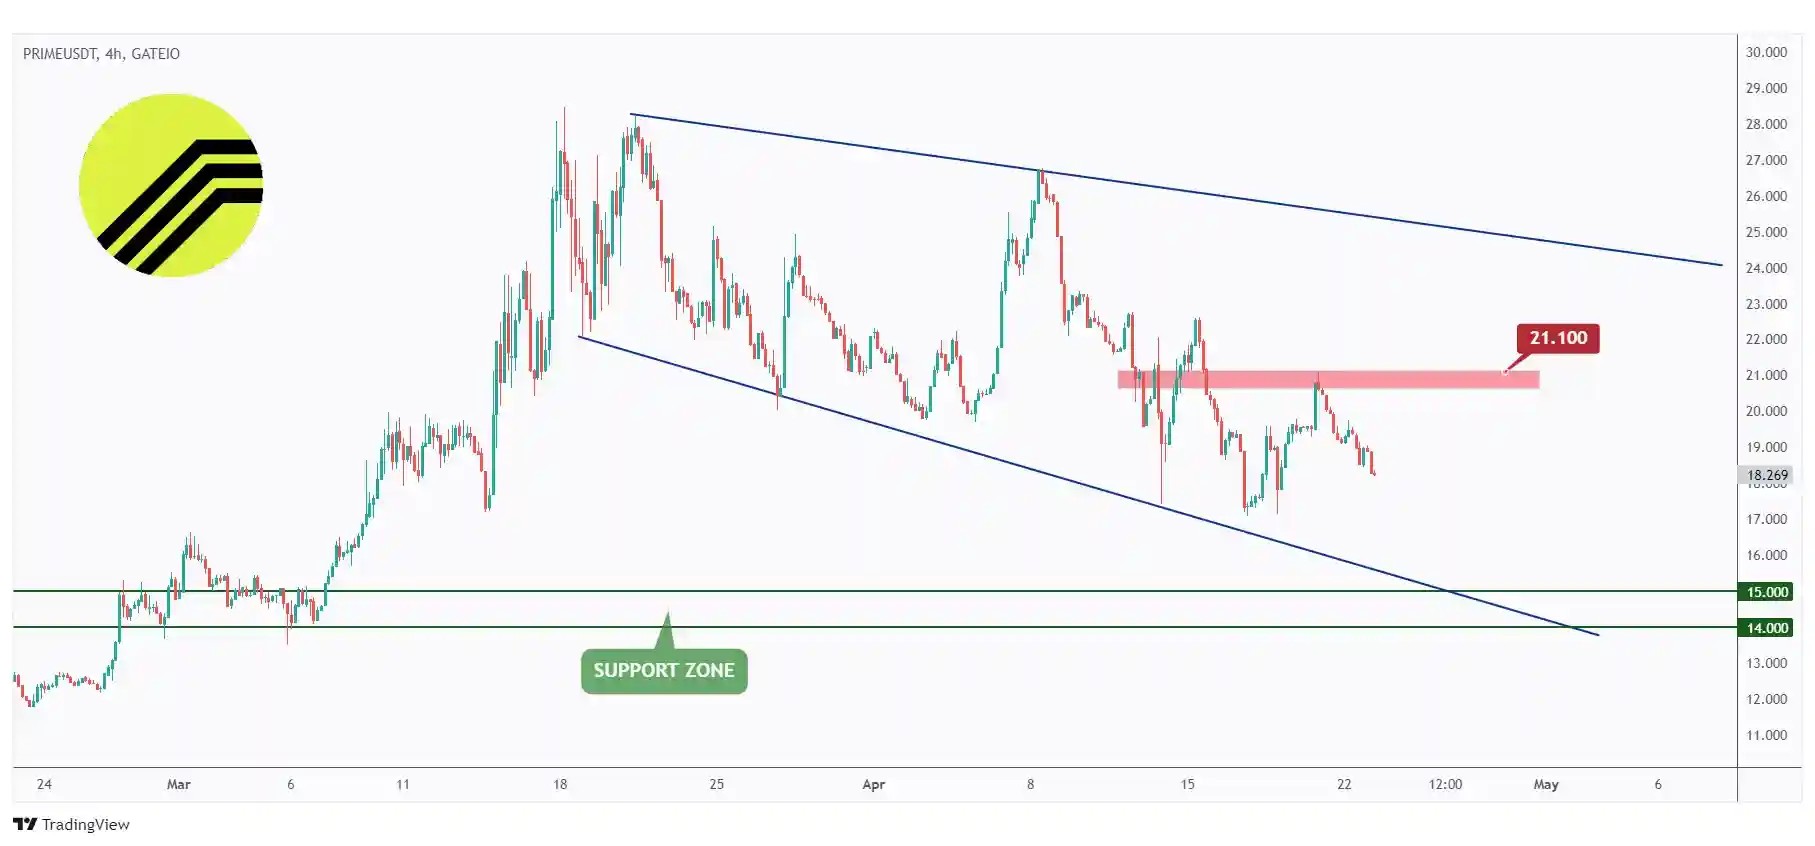 PRIME 4h chart overall bearish trading within a falling channel and currently approaching the lower bound around $16.